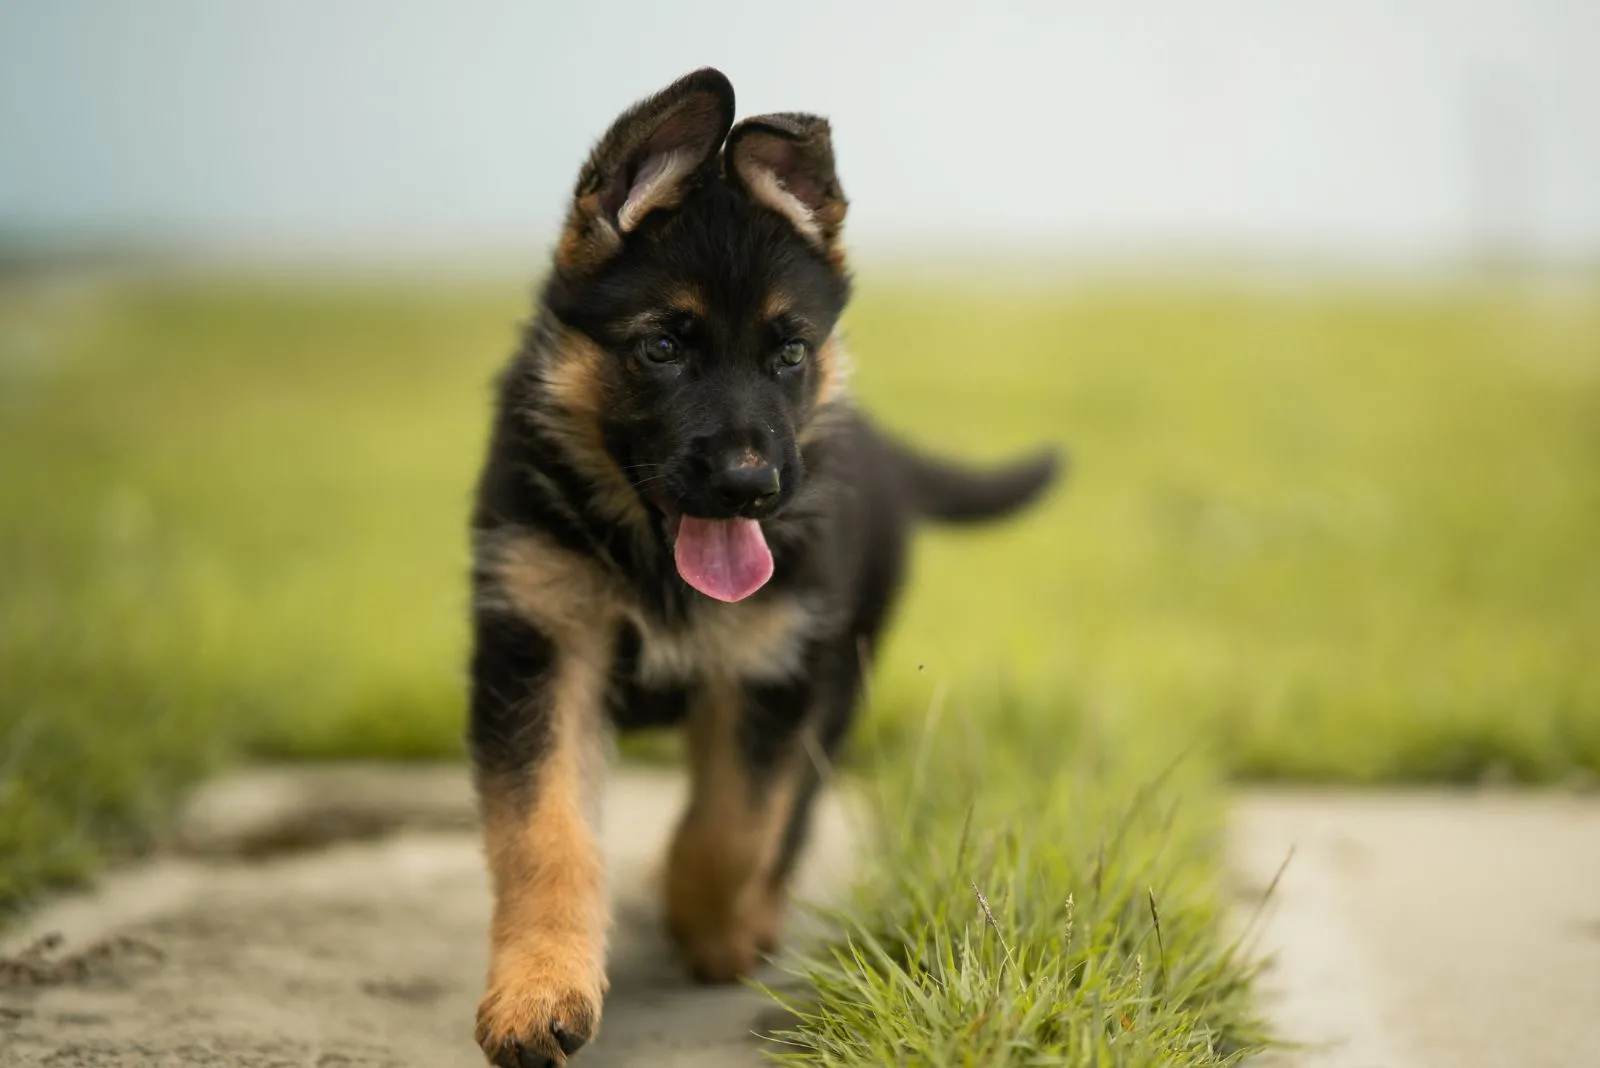 German Shepherd Puppy walks with tongue out